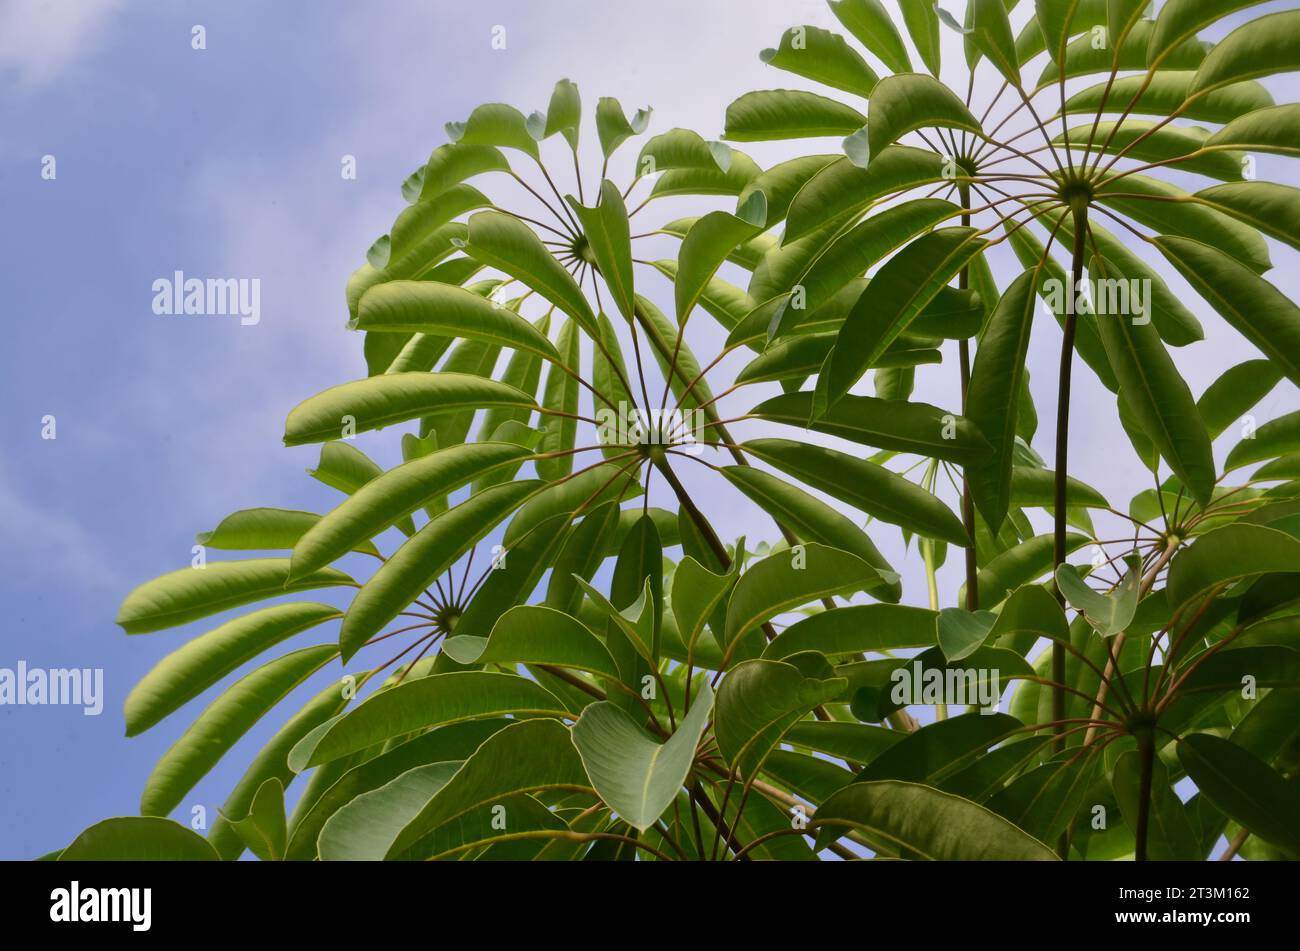 Heptapleurum actinophyllum or Umbrella Tree has green compound leaves with long stalks and is arranged around the trunk. Stock Photo